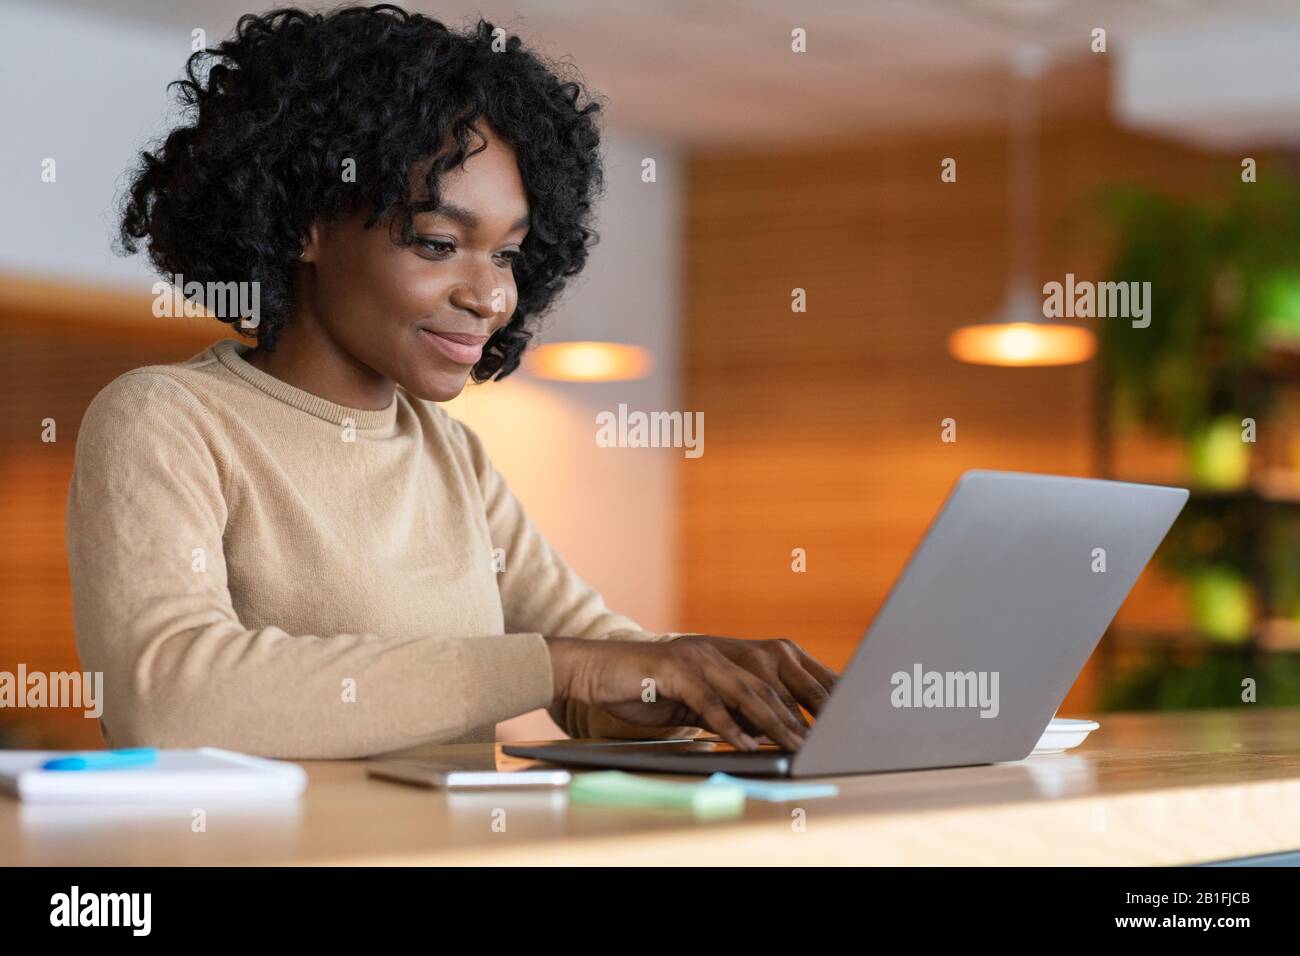 Female blogger working at cafe, typing on laptop Stock Photo